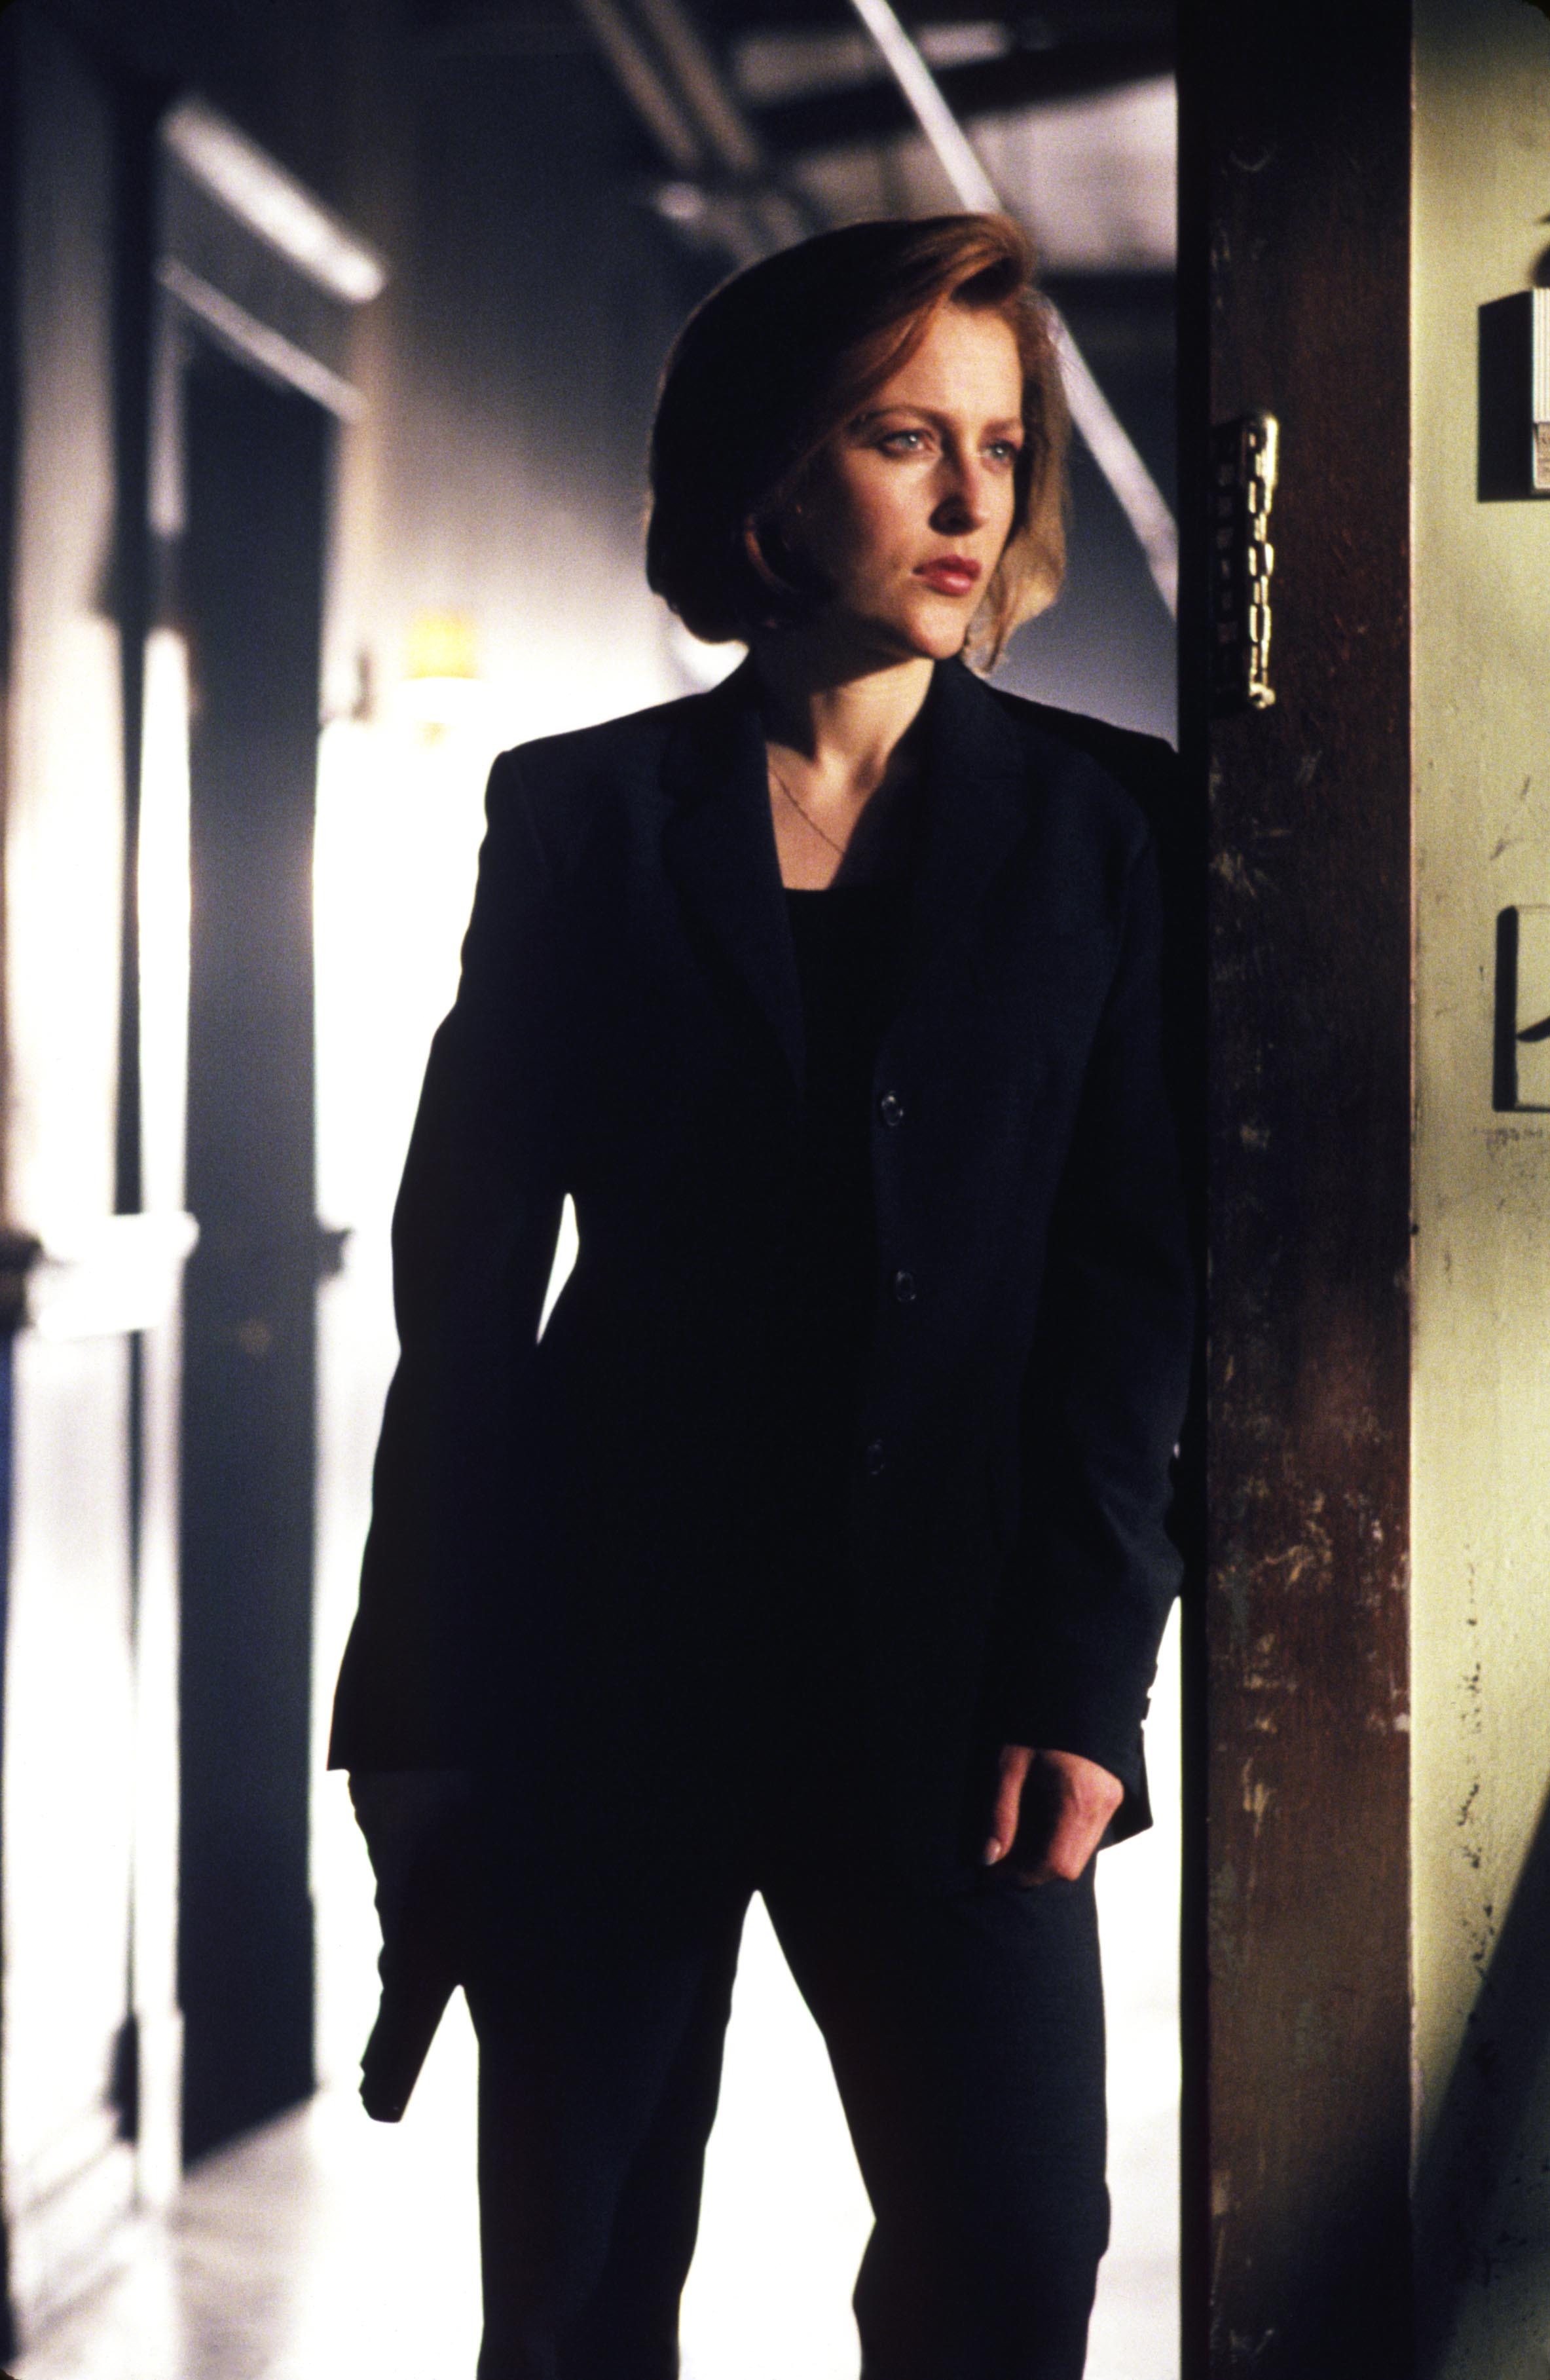 Dana Scully, Special Agent: Looking Fabulous Department